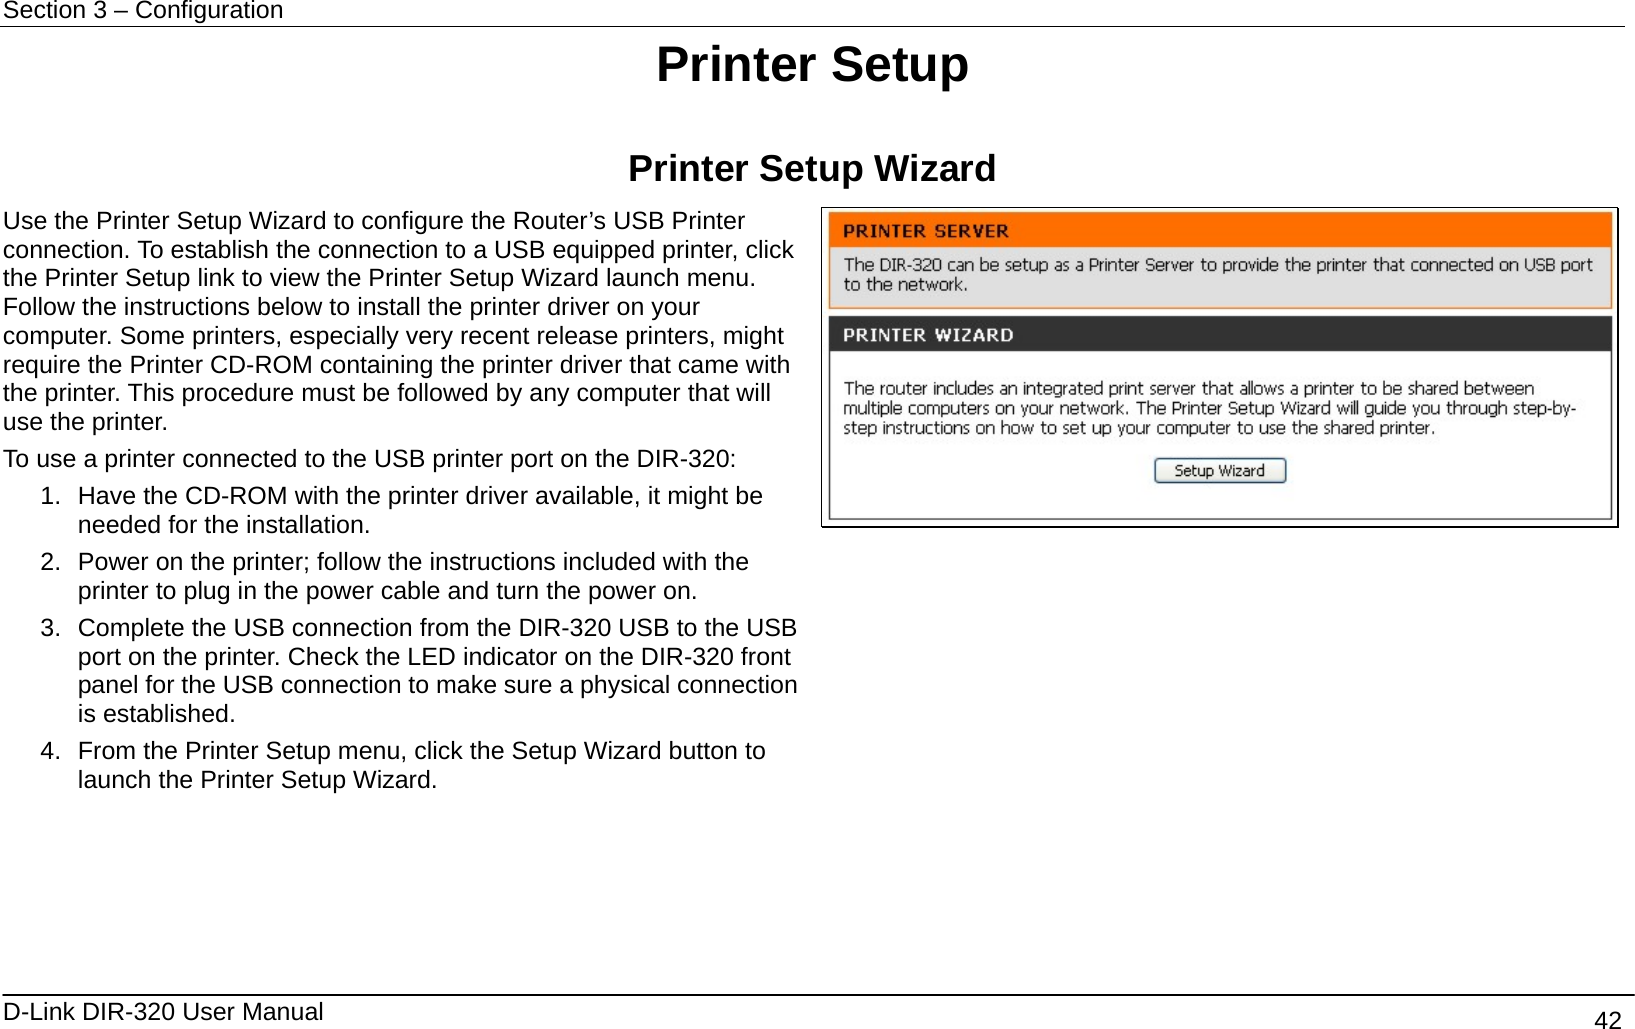 Section 3 – Configuration   D-Link DIR-320 User Manual                                       42 Printer Setup  Printer Setup Wizard Use the Printer Setup Wizard to configure the Router’s USB Printer connection. To establish the connection to a USB equipped printer, click the Printer Setup link to view the Printer Setup Wizard launch menu. Follow the instructions below to install the printer driver on your computer. Some printers, especially very recent release printers, might require the Printer CD-ROM containing the printer driver that came with the printer. This procedure must be followed by any computer that will use the printer. To use a printer connected to the USB printer port on the DIR-320: 1.  Have the CD-ROM with the printer driver available, it might be needed for the installation.   2.  Power on the printer; follow the instructions included with the printer to plug in the power cable and turn the power on. 3.  Complete the USB connection from the DIR-320 USB to the USB port on the printer. Check the LED indicator on the DIR-320 front panel for the USB connection to make sure a physical connection is established. 4.  From the Printer Setup menu, click the Setup Wizard button to launch the Printer Setup Wizard.        